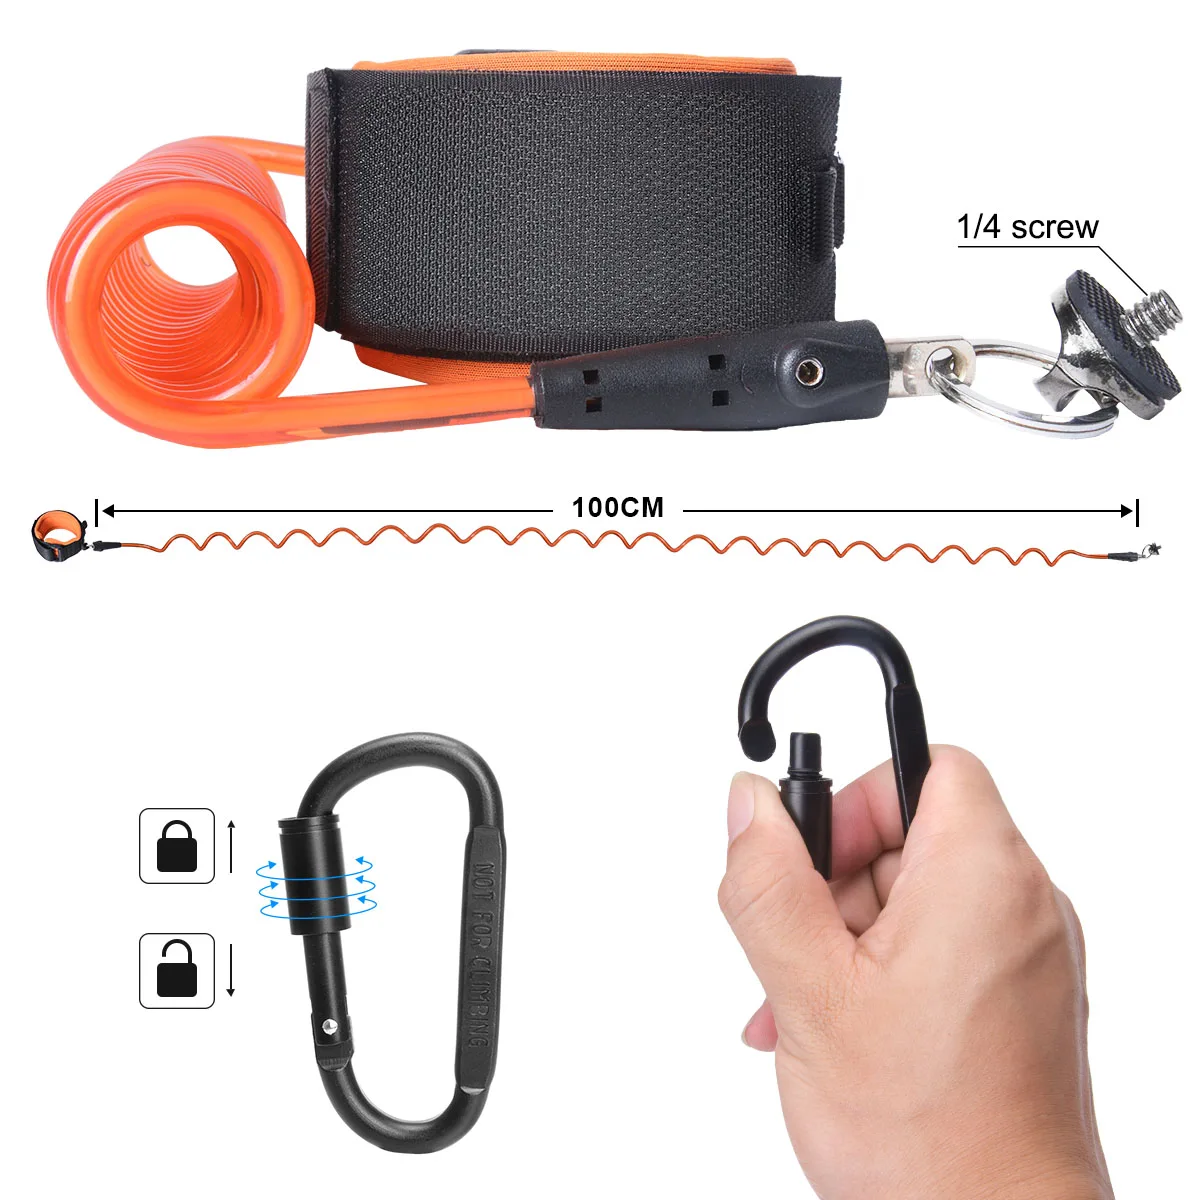 Action Camera Non-Slip Handler Floating Hand Grip Holder Mount + Steel-Cored Safety Tether Wrist Strap for GoPro Sony Olympus Ak images - 6